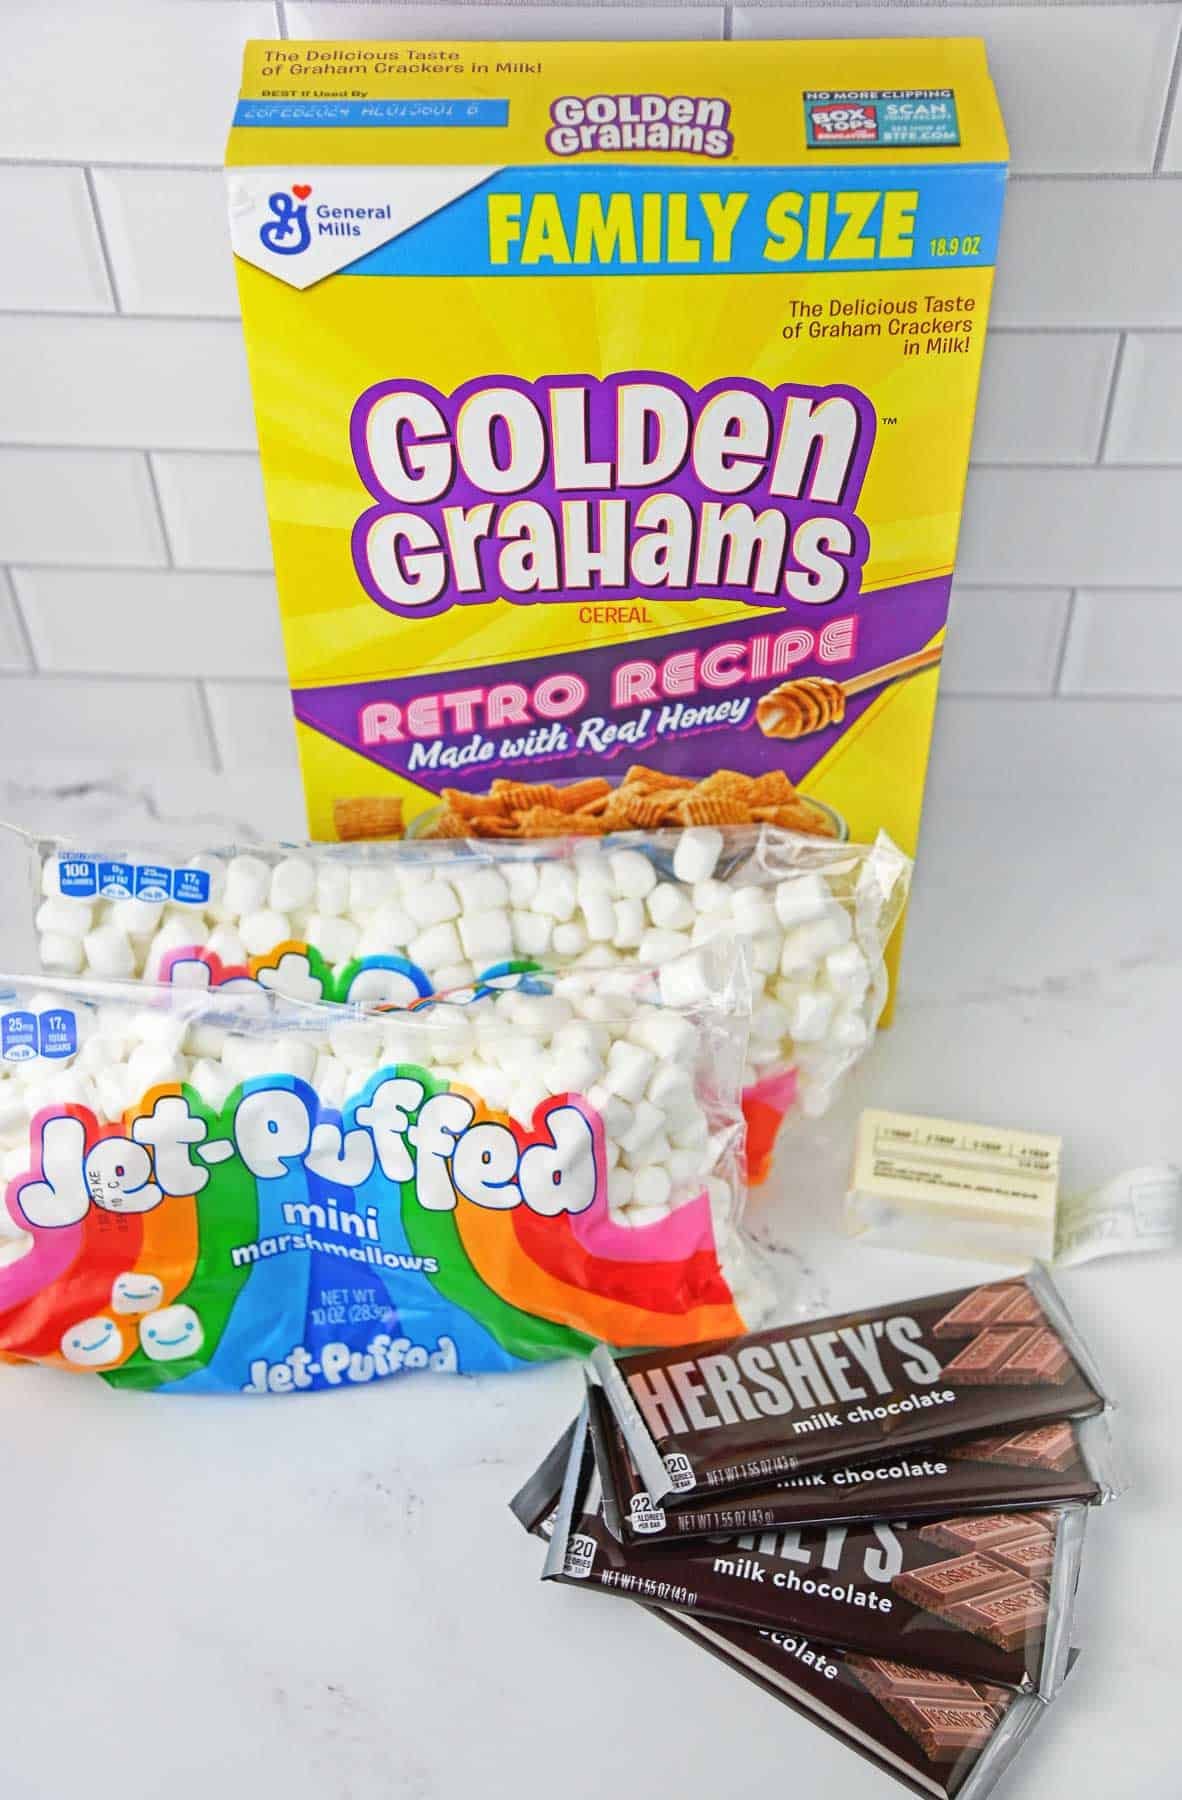 Ingredients for Golden Graham cereal bars - marshmallows, golden grahams cereal, butter and chocolate bars.